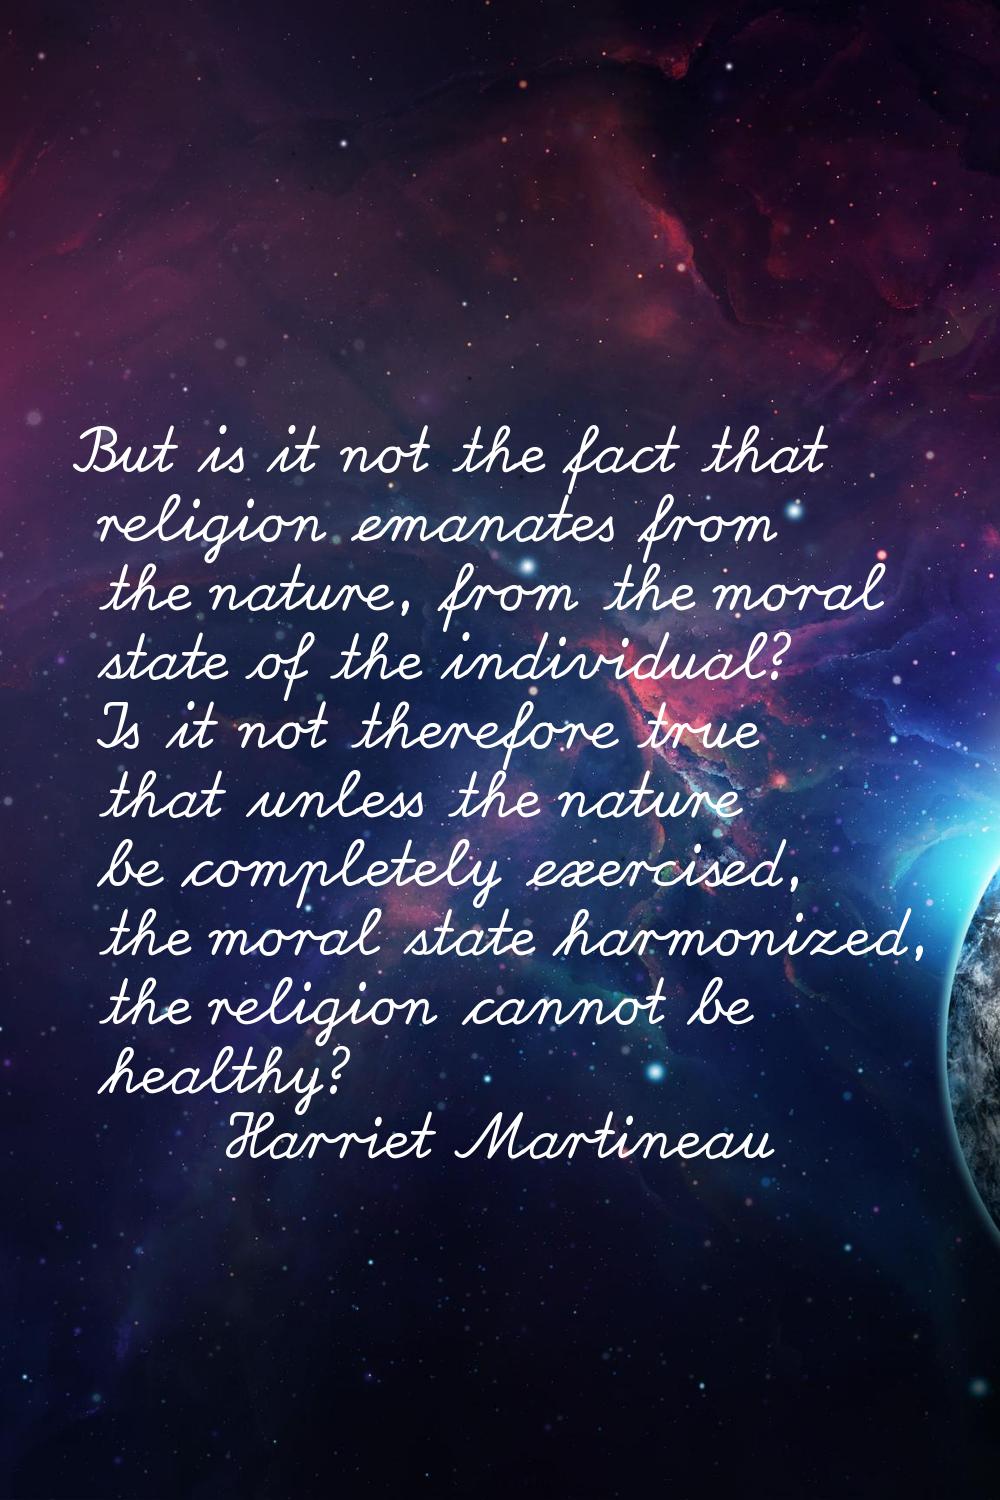 But is it not the fact that religion emanates from the nature, from the moral state of the individu